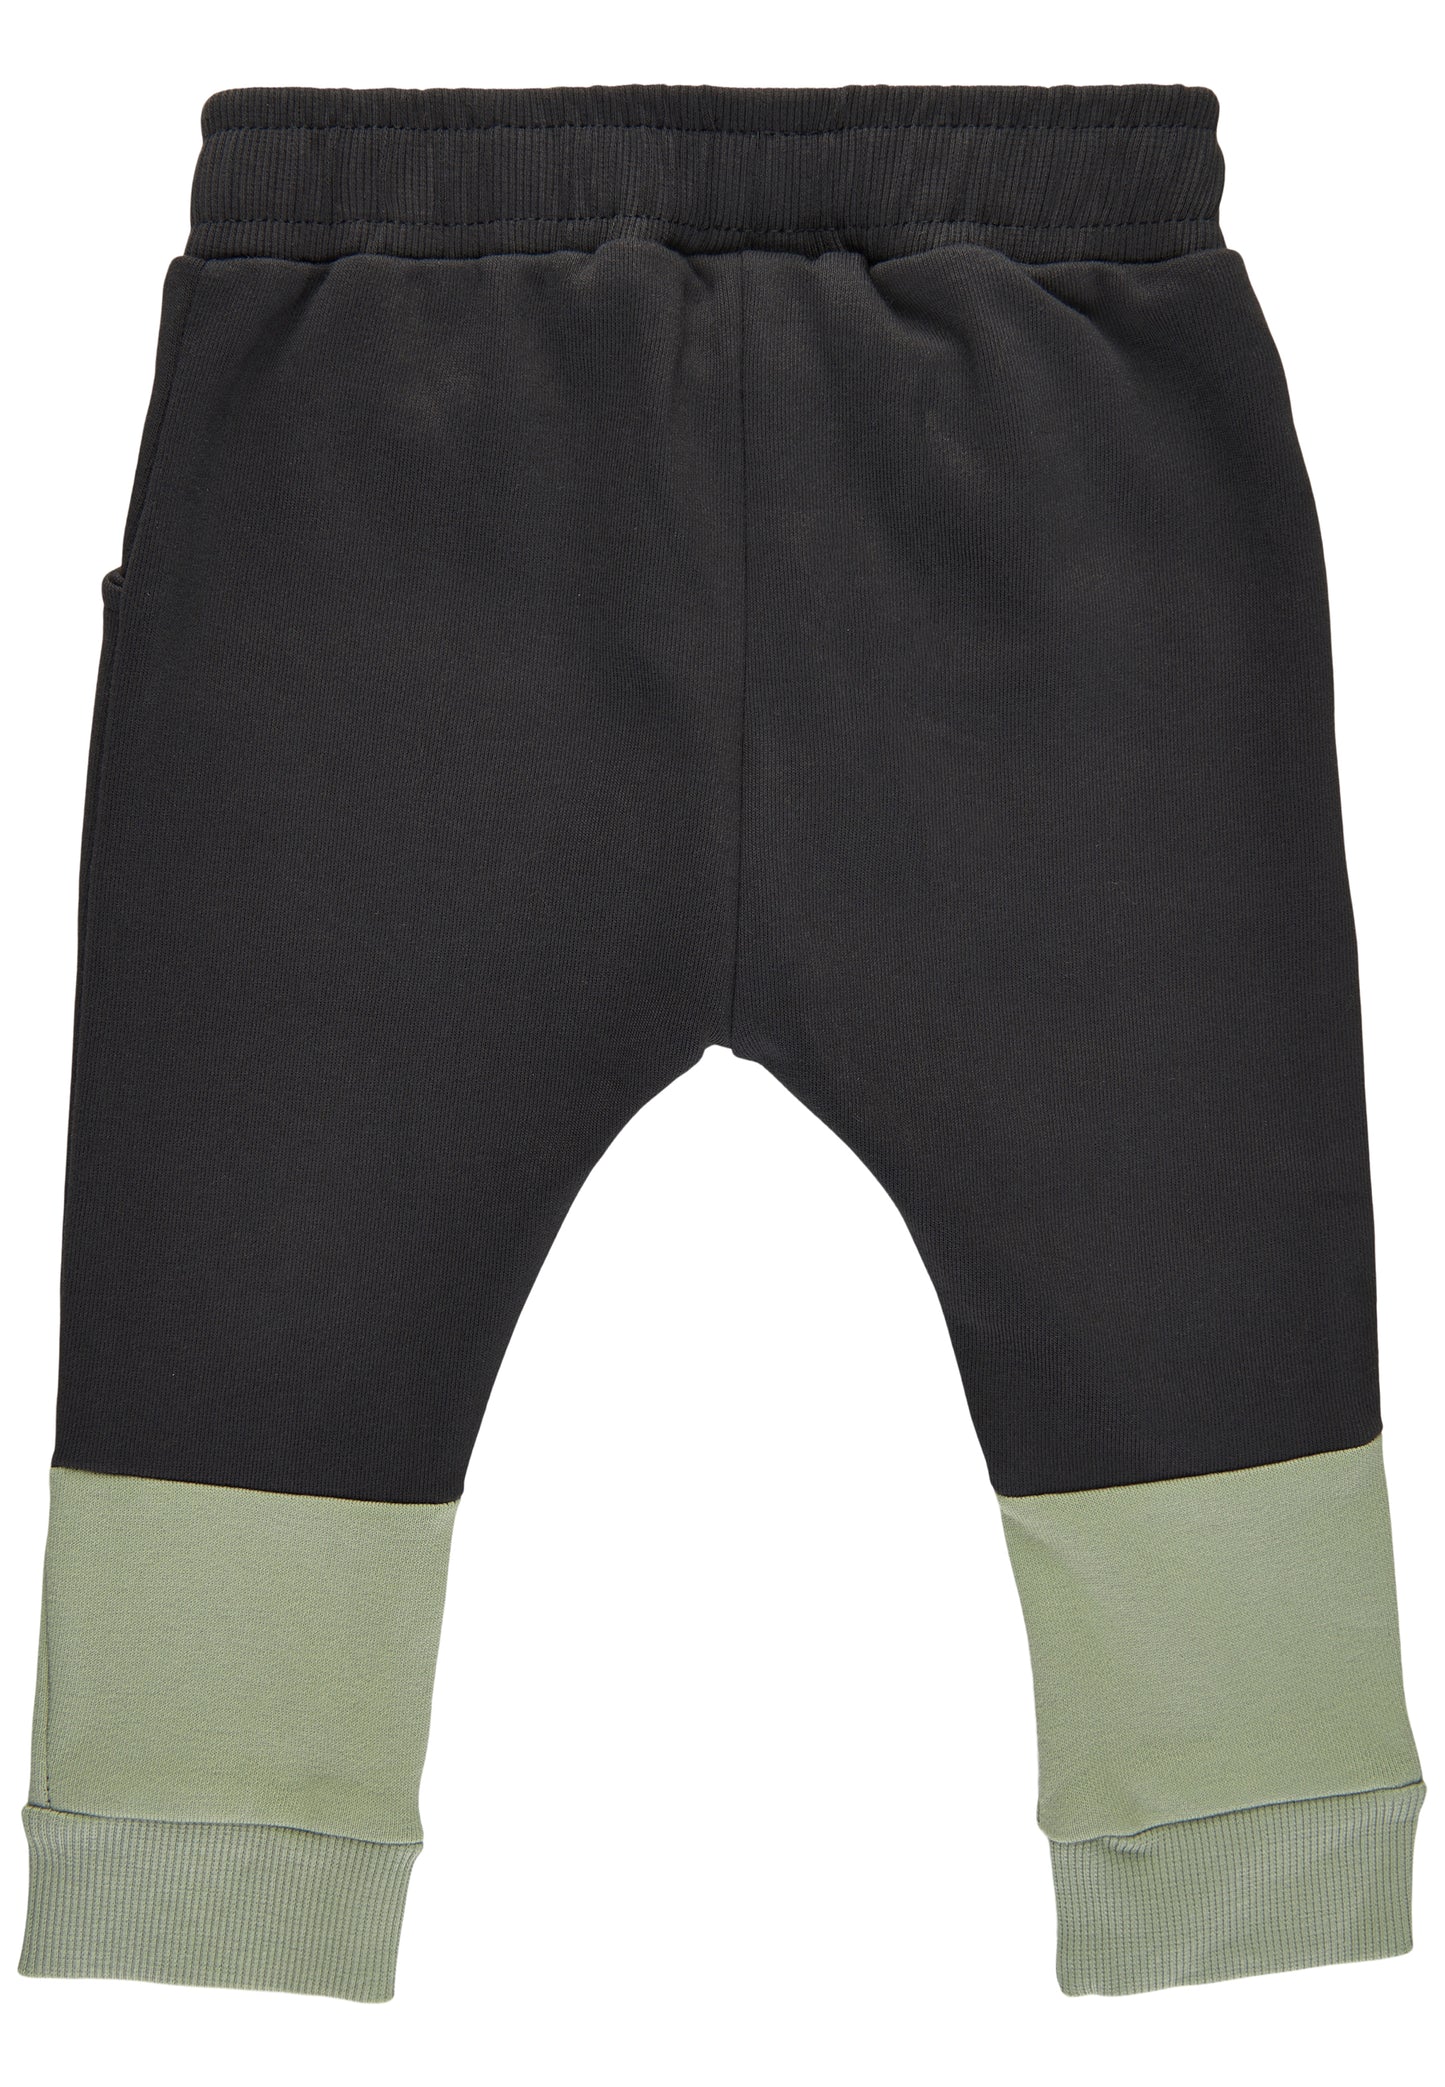 Hince Baby Sweatpants - Seagrass